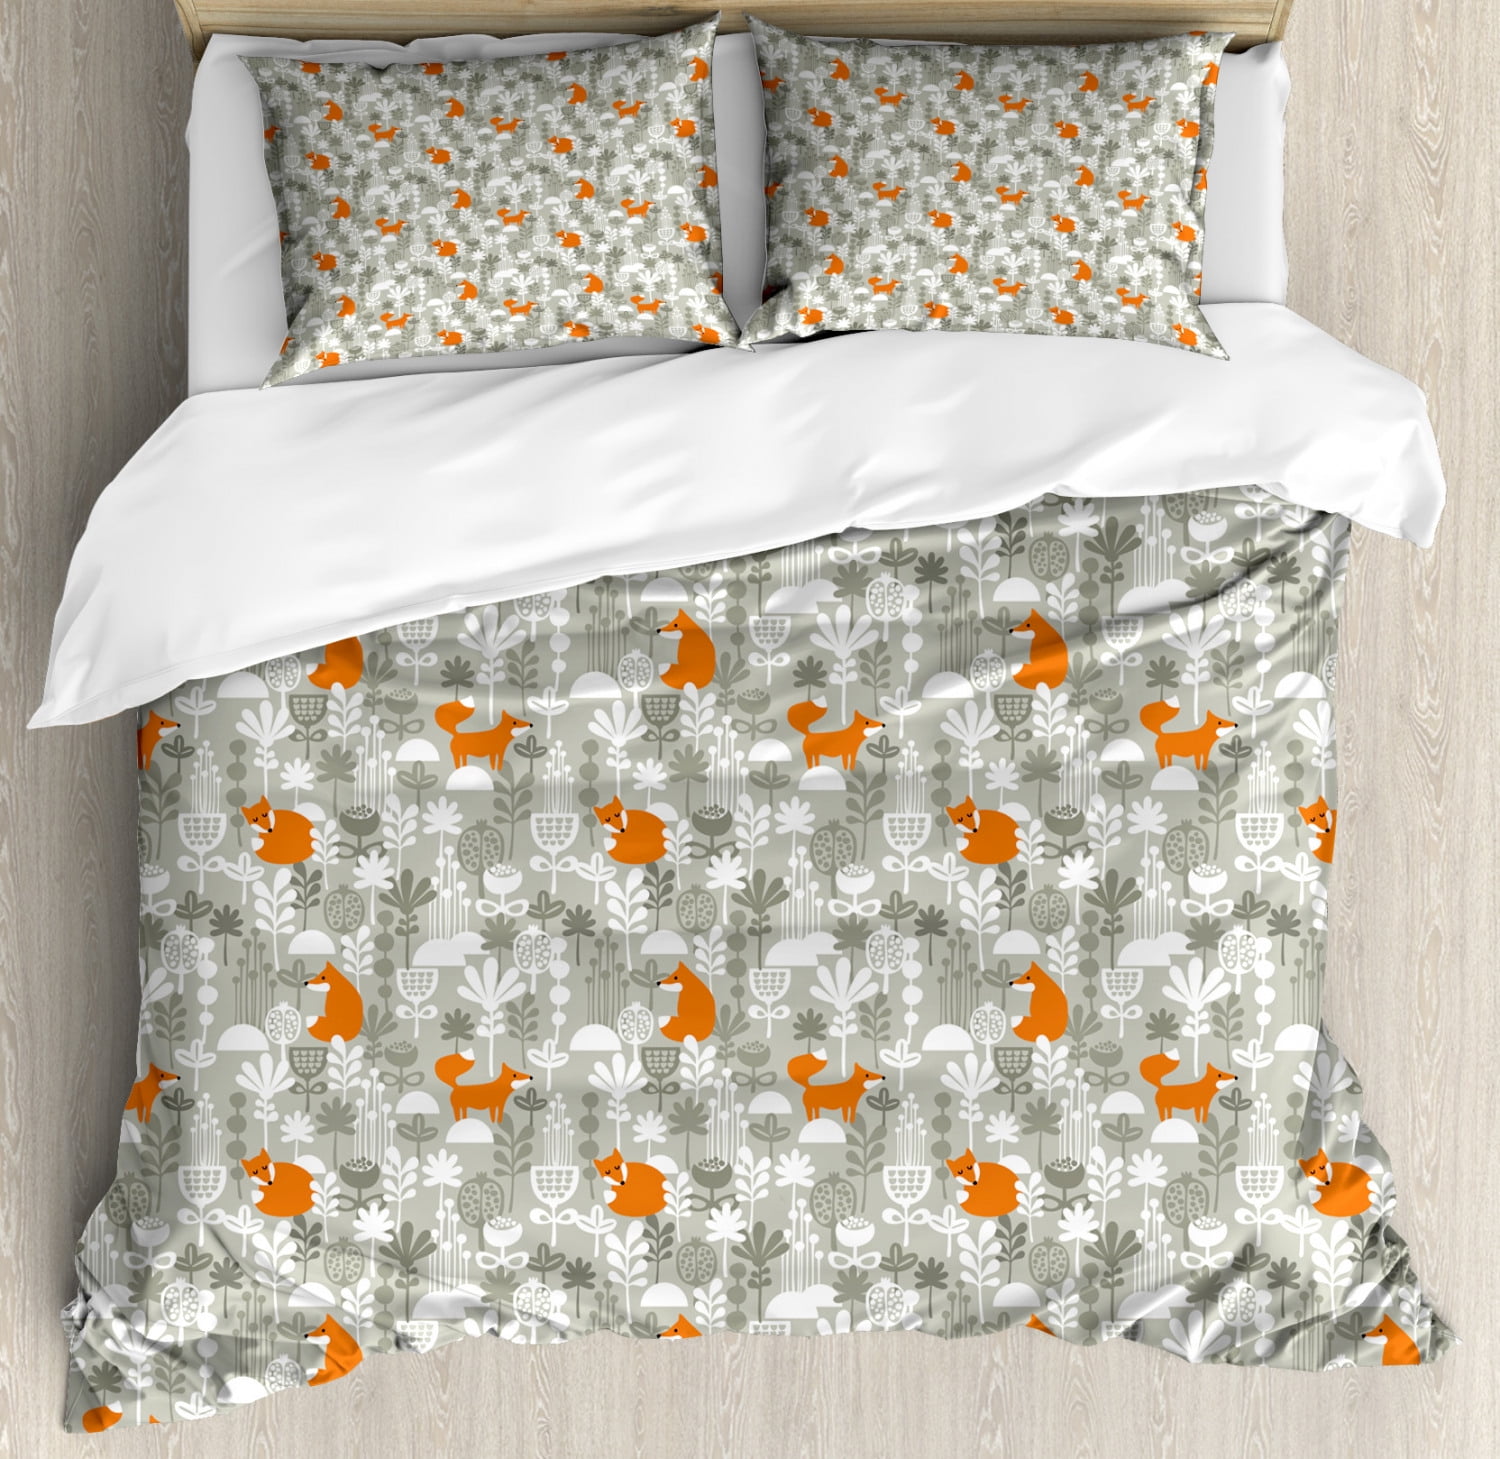 Fox King Size Duvet Cover Set Orange Silhouettes In Winter Forest